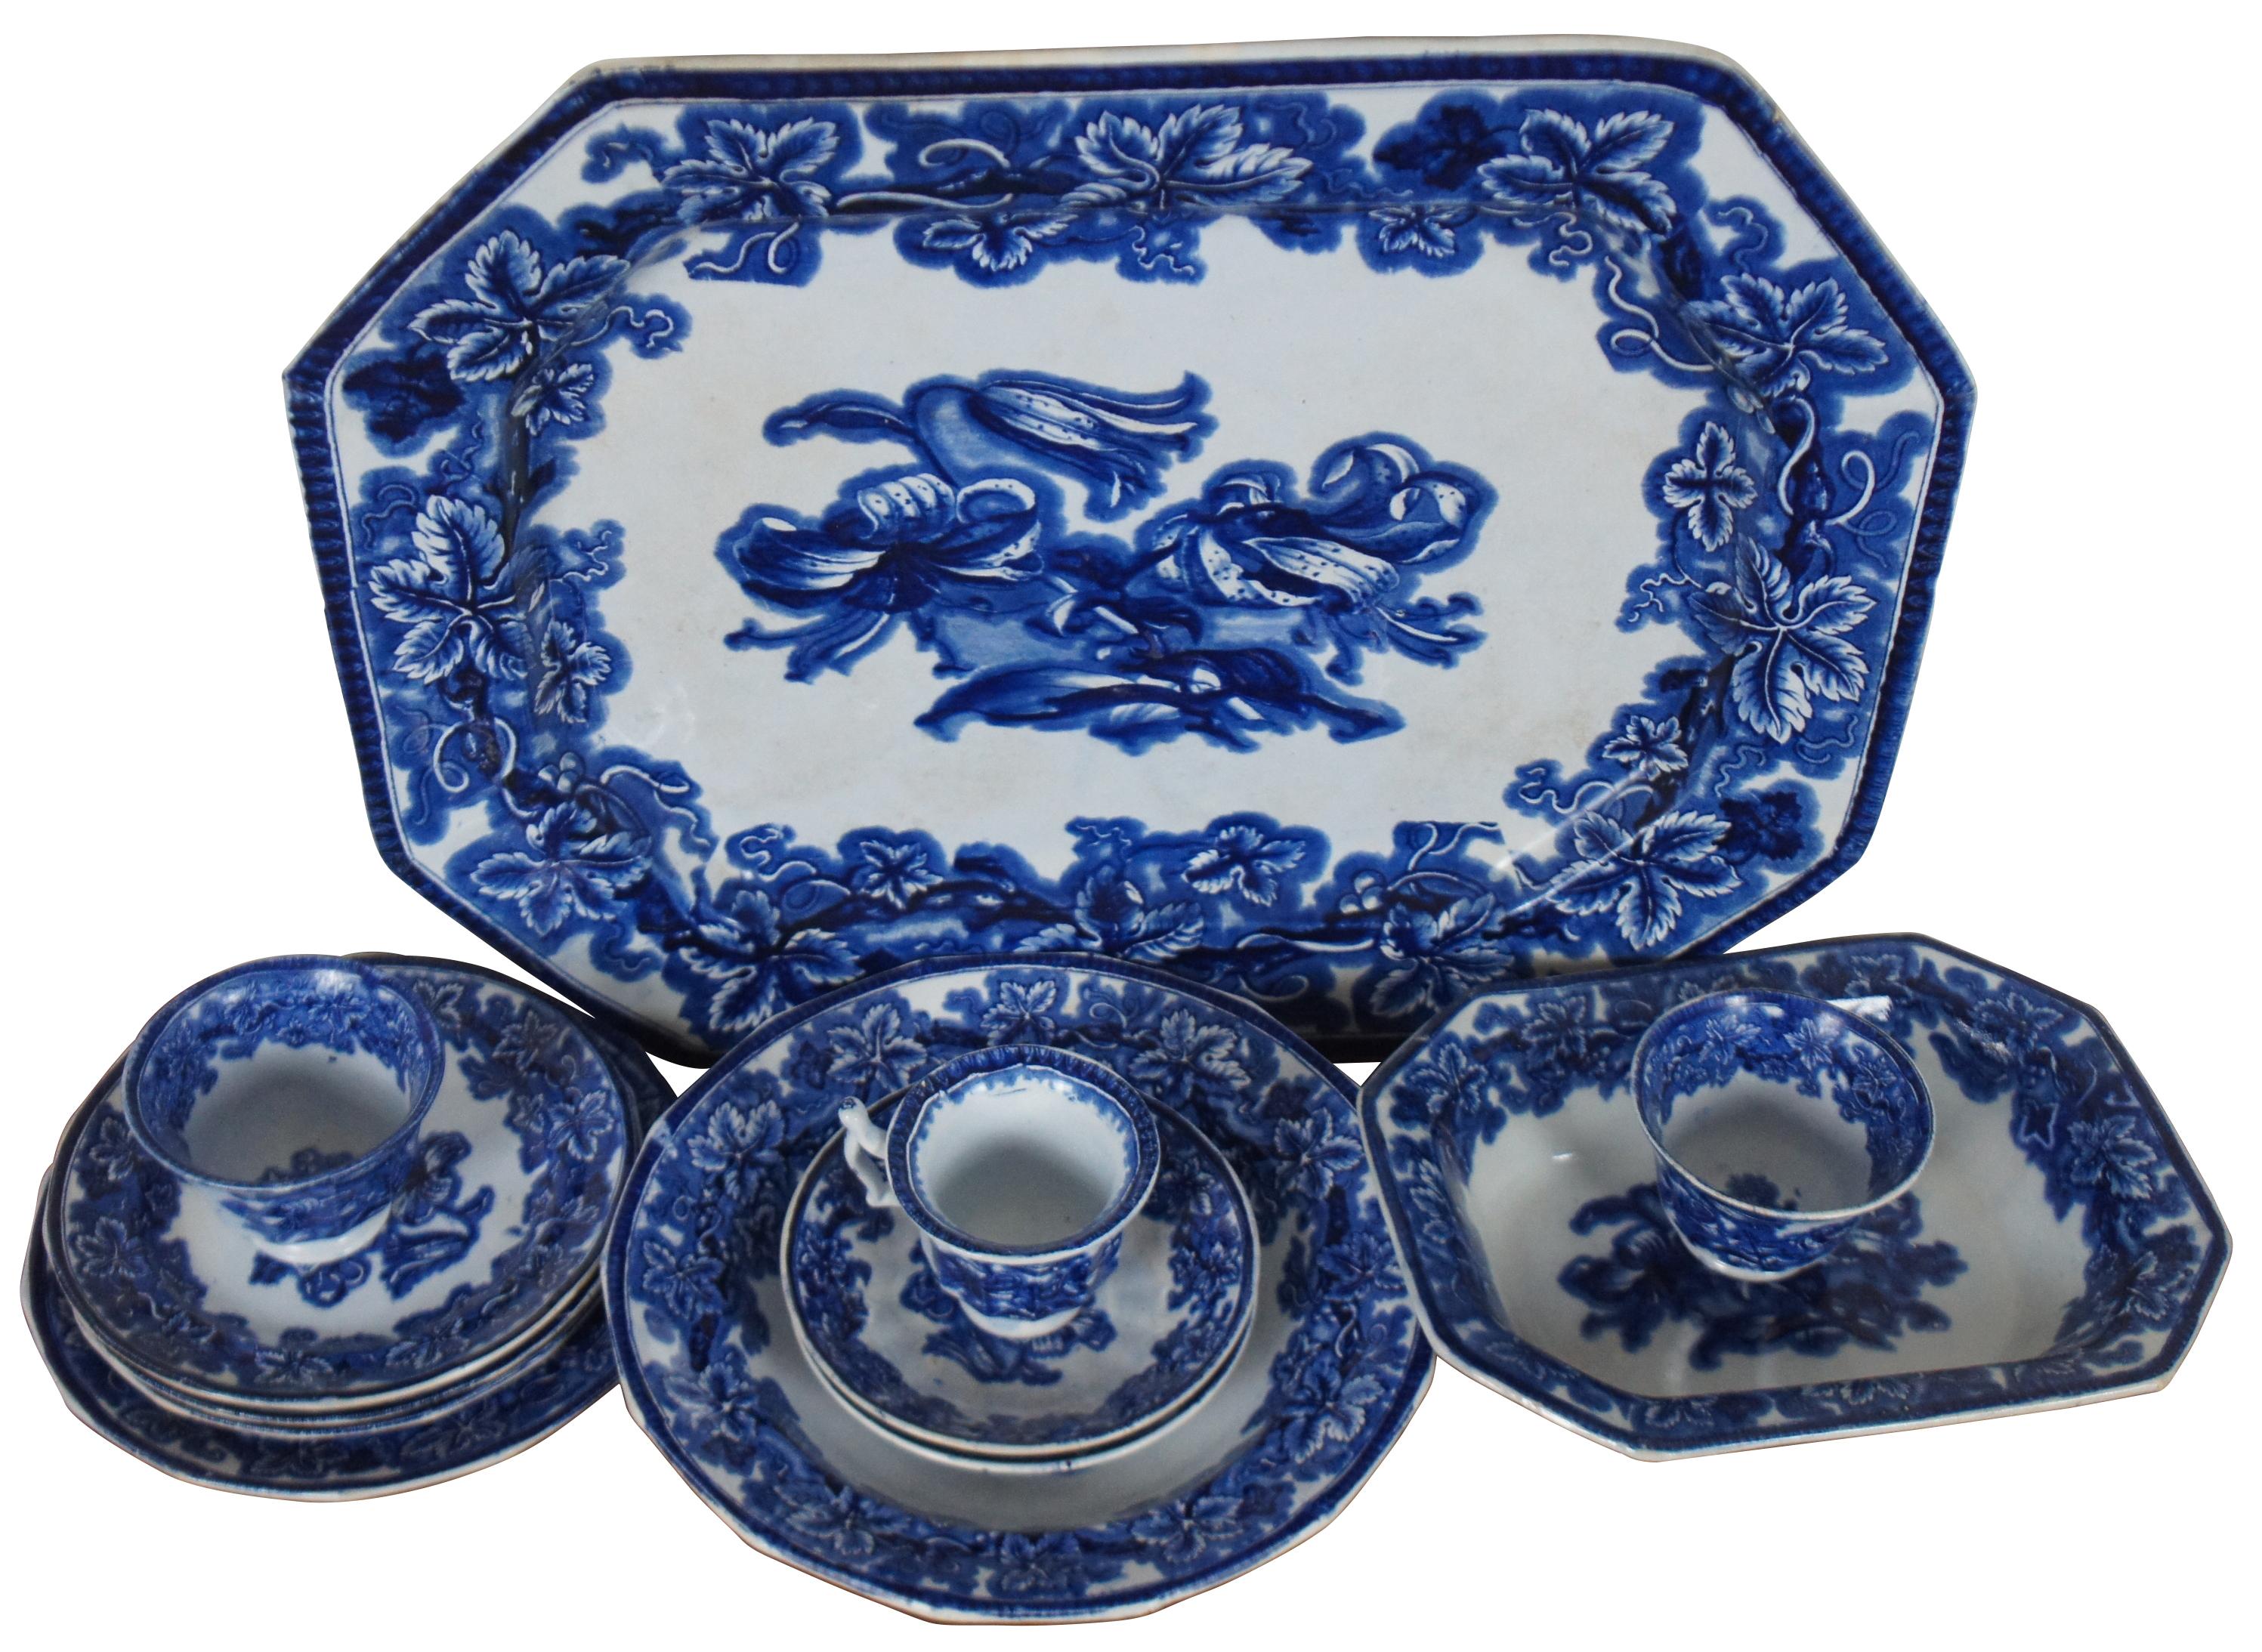 Twelve pieces of antique flow blue porcelain circa 1845 by George Phillips of Longport, Staffordshire, England in the Lobelia pattern. Lot includes a rectangular platter, a rectangular vegetable dish, one soup plate/bowl, one salad plate, three